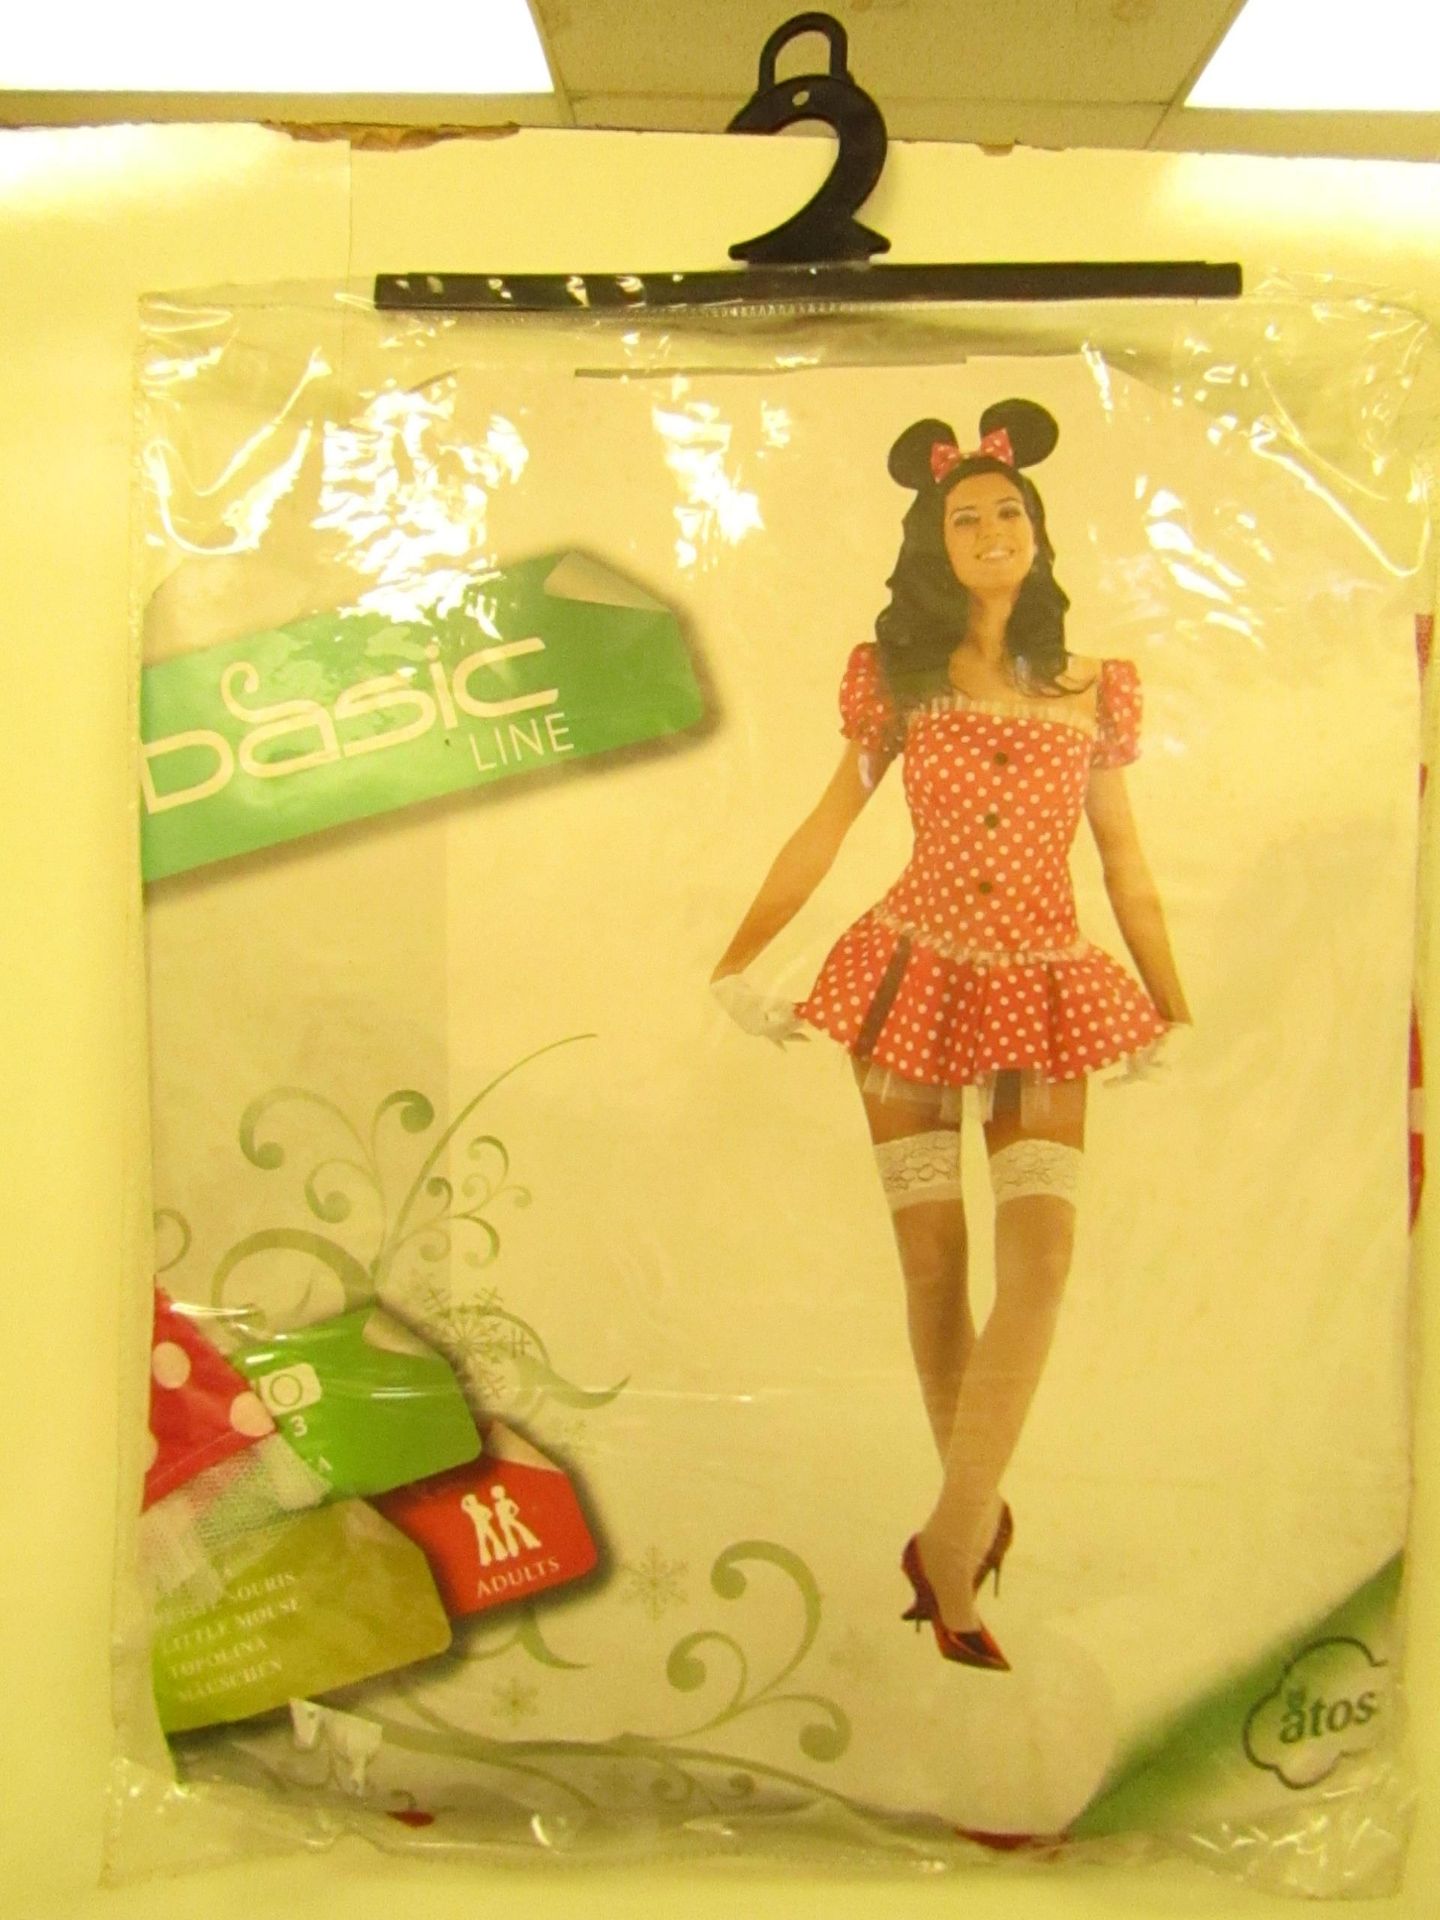 1 x Adult Fancy Dress Little Mouse Outfit size S/M new & packaged